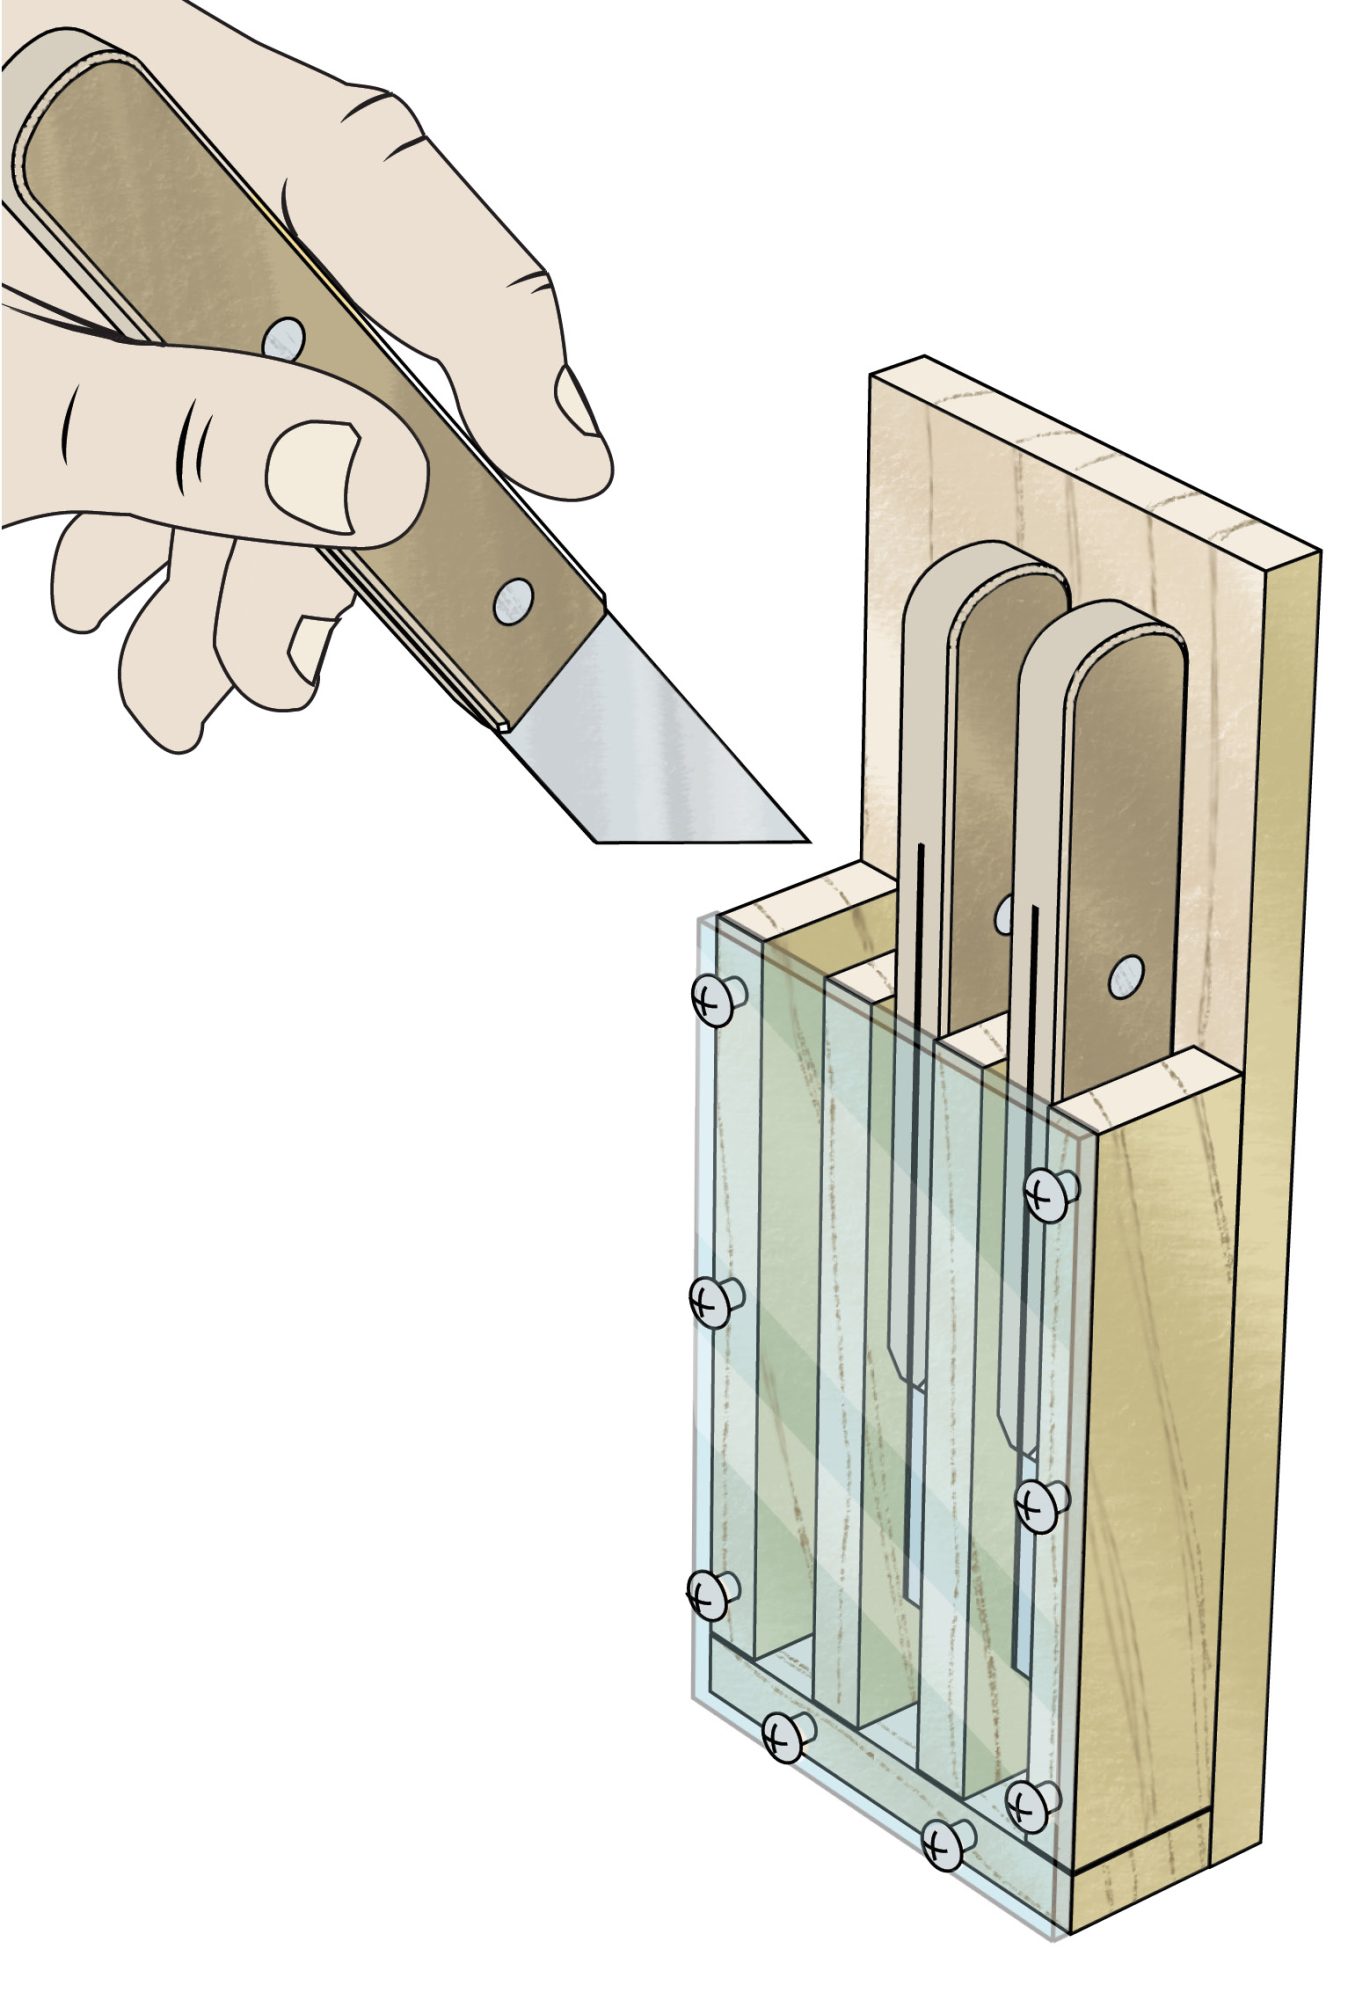 Drawing of marking knife case